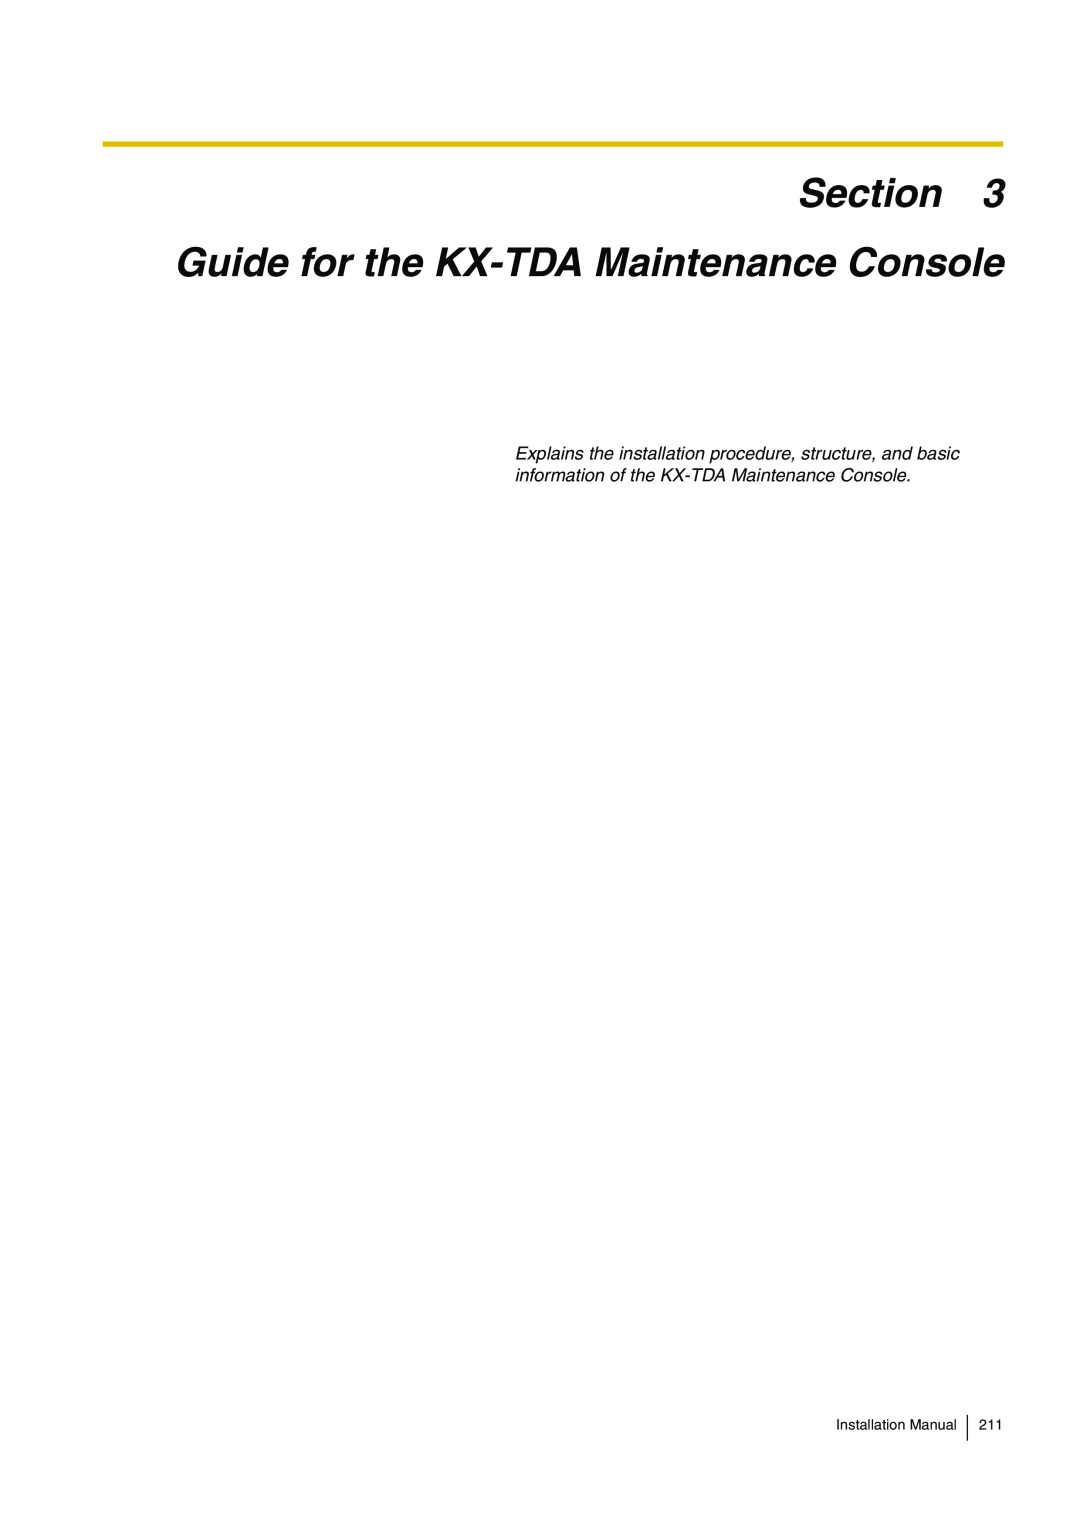 Panasonic KX-TDA100 installation manual Section Guide for the KX-TDA Maintenance Console 